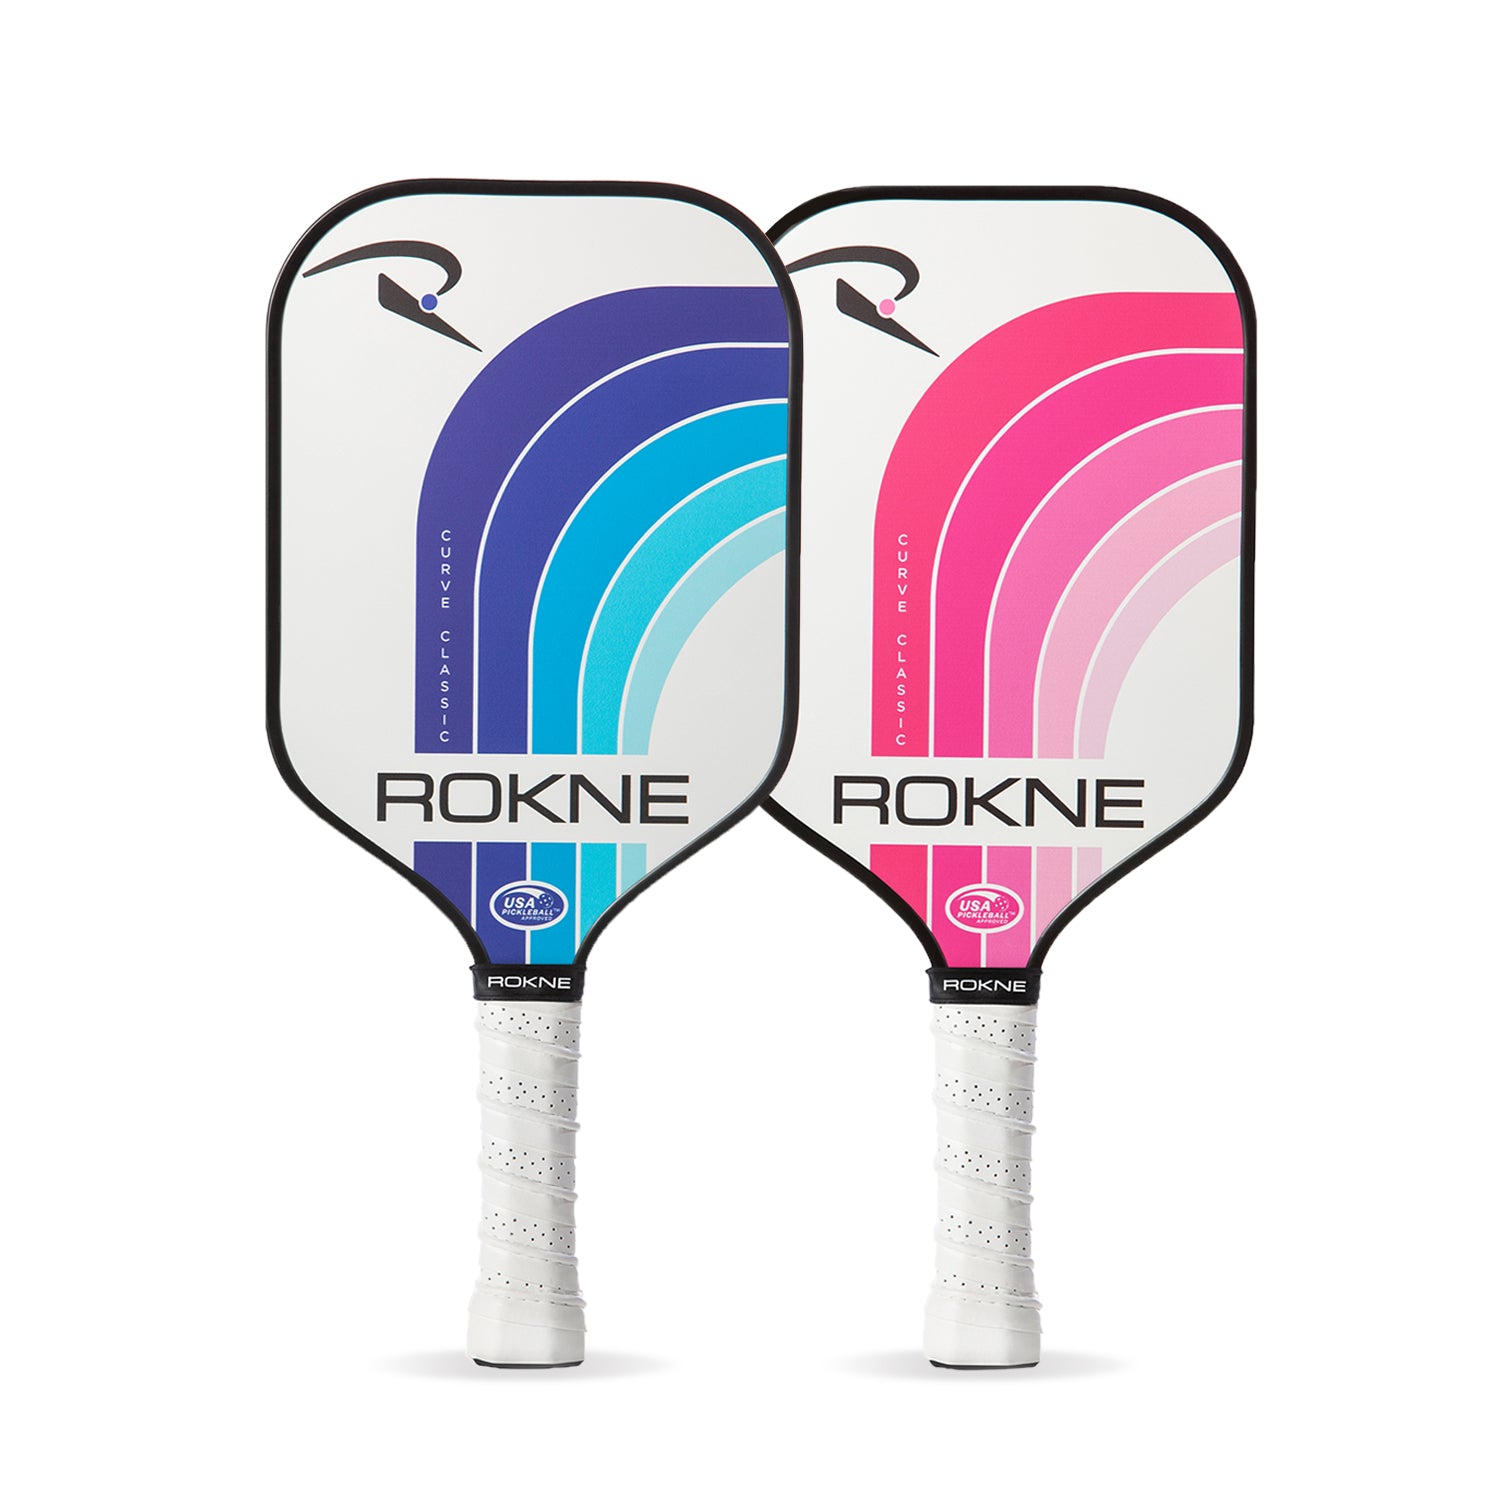 ROKNE Curve Classic Pickleball Paddle Set - The His & Her Set